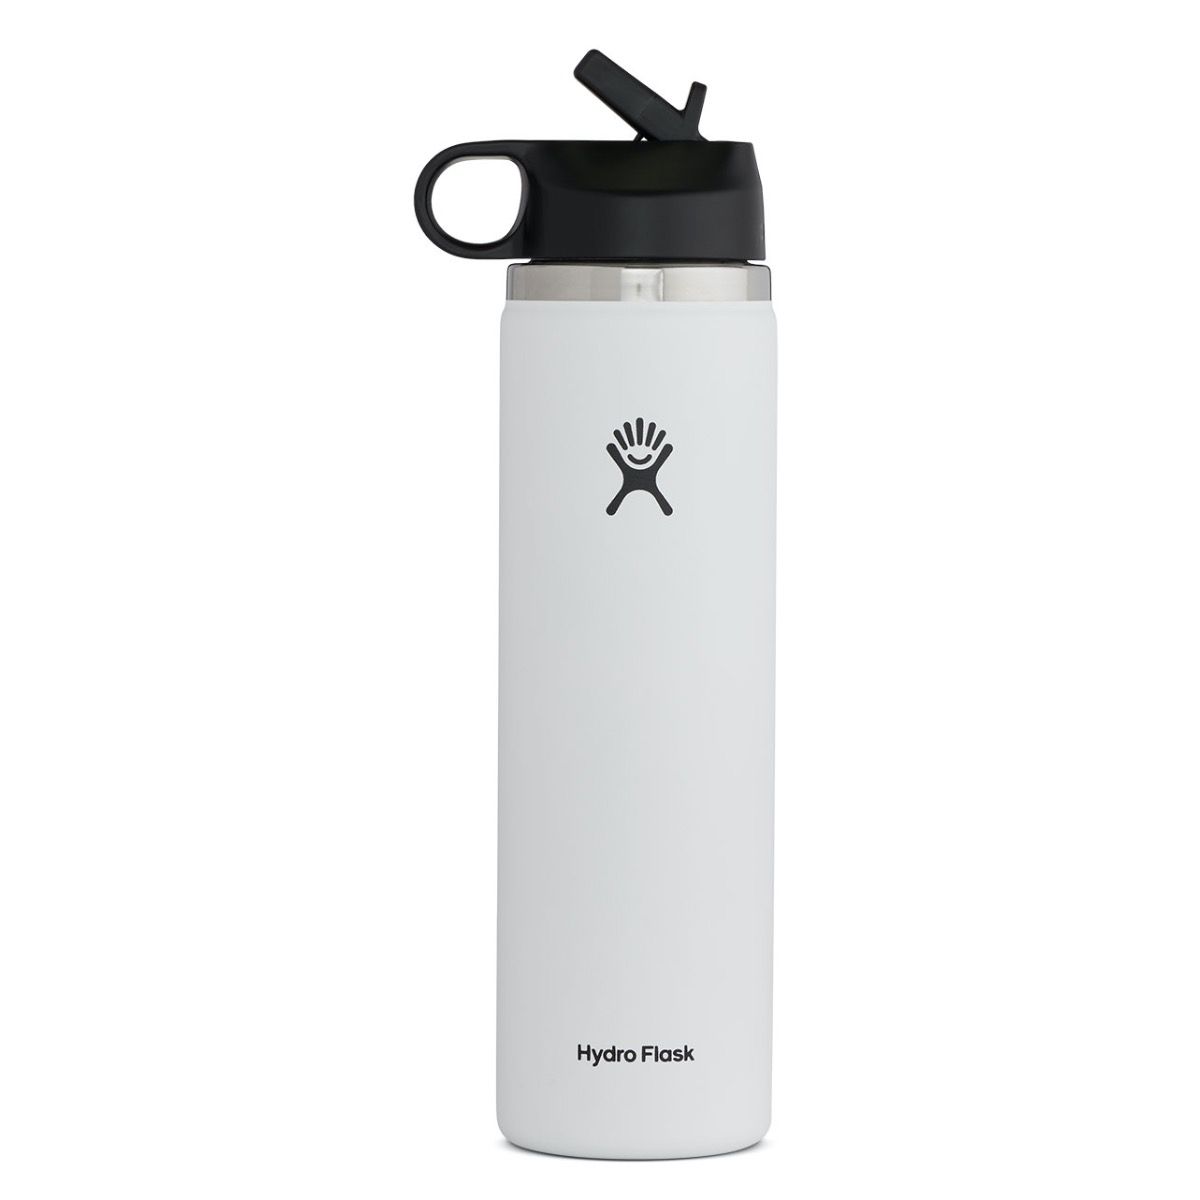 Hydro Flask 20 oz. Wide Mouth Bottle - Seagrass